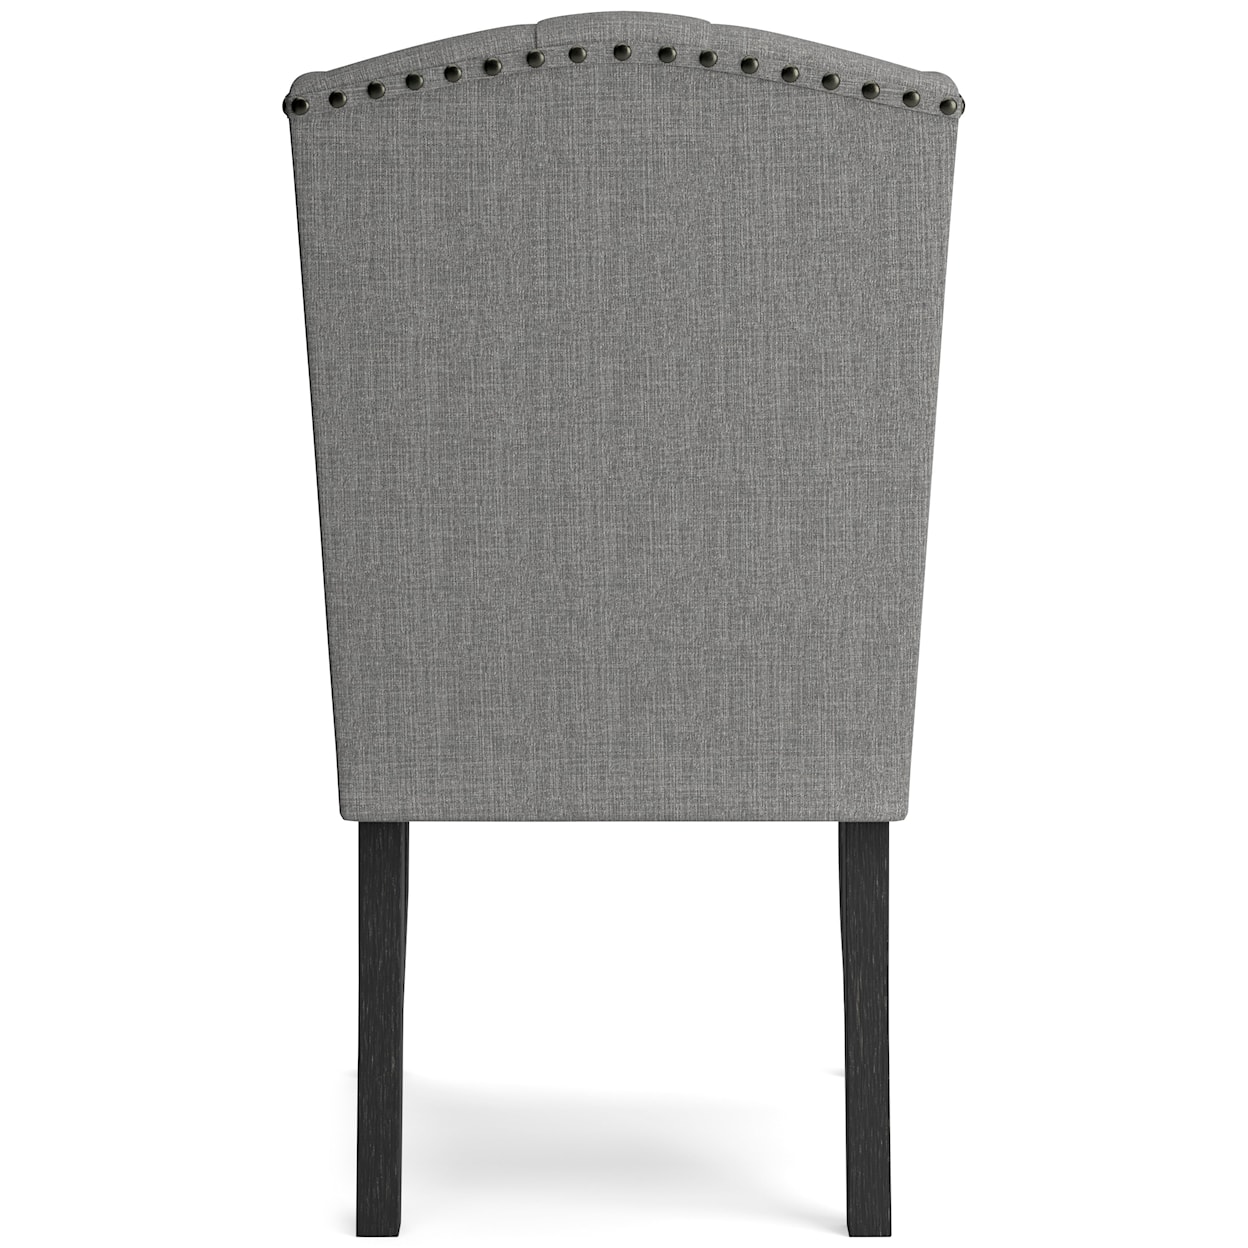 Ashley Furniture Signature Design Jeanette Dining Chair